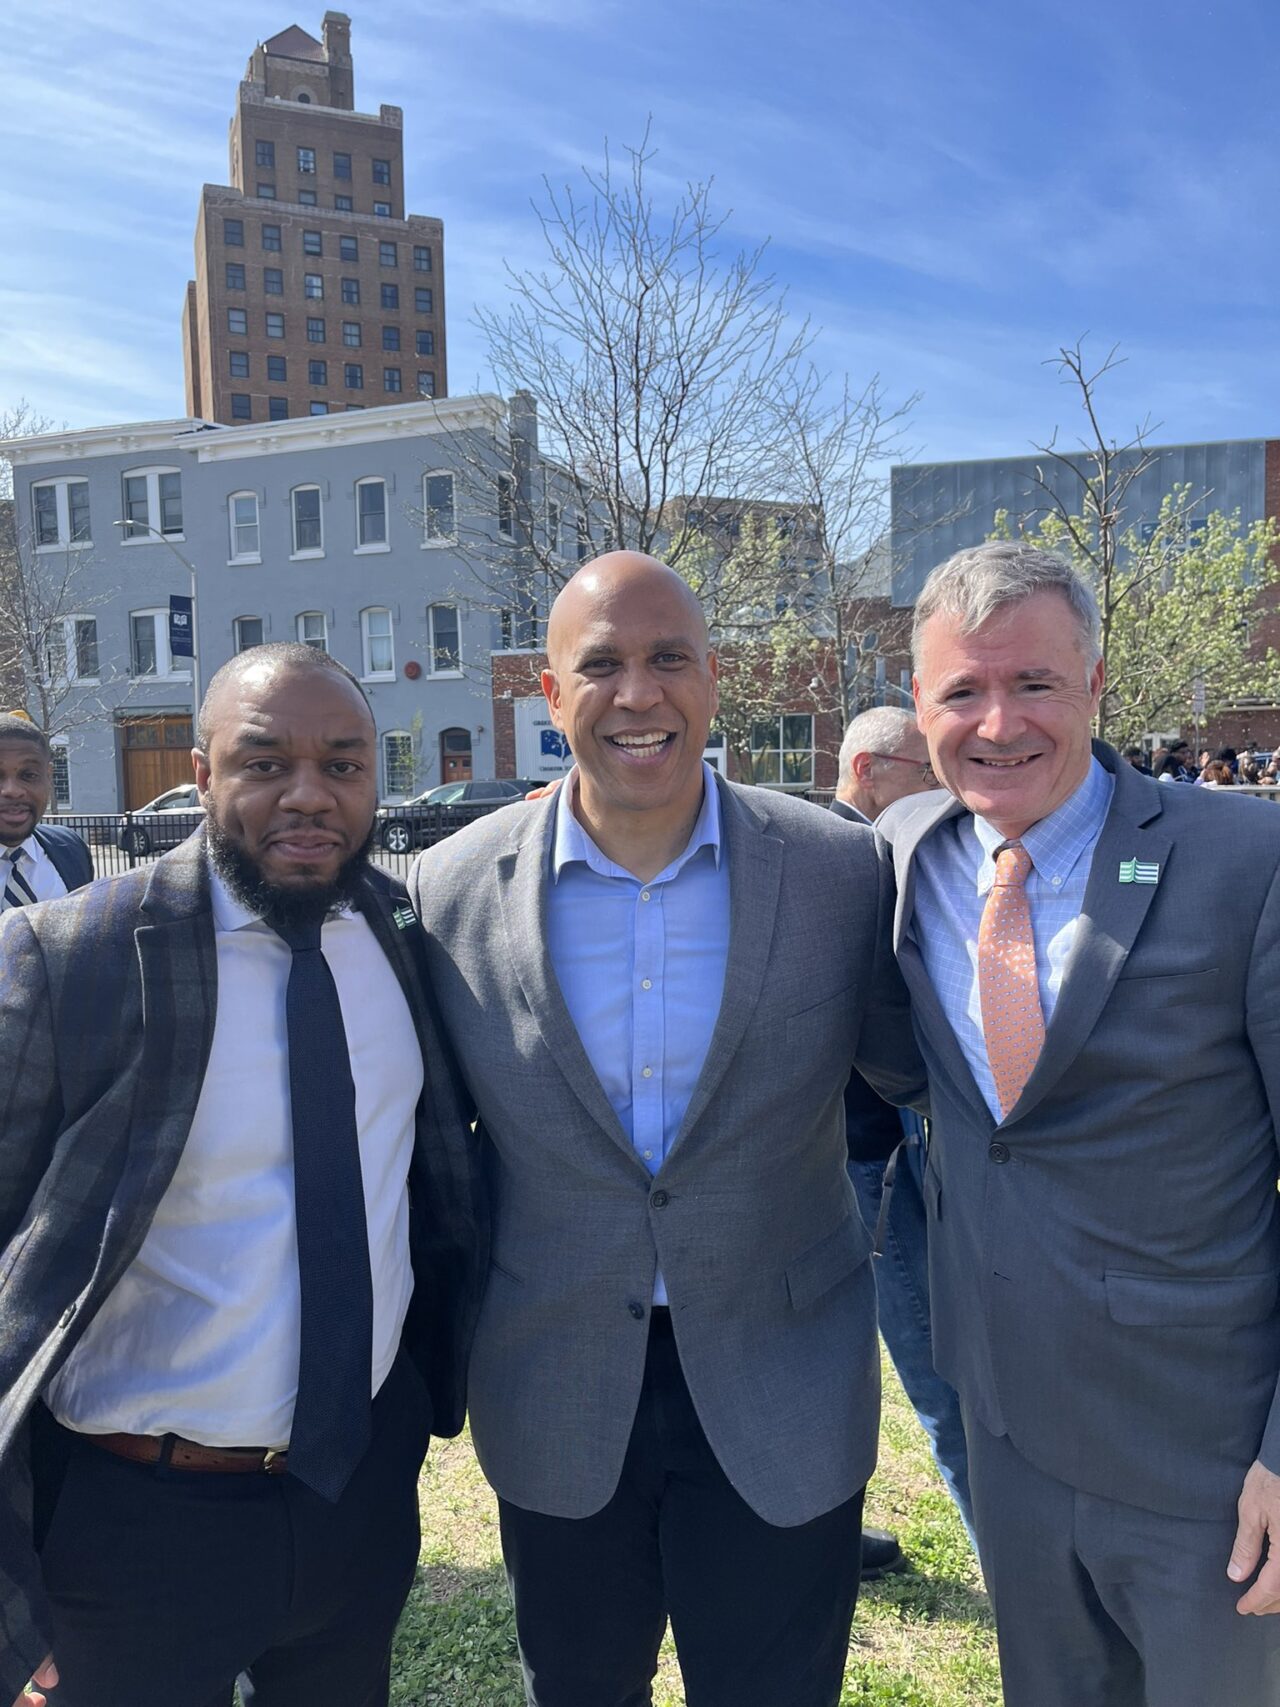 (From L to R) American Forests Vice President of Urban Forests Policy Joel Pannell, Senator Cory Booker and American Forests President and CEO Jad Daley together in New Jersey. They were attending the event at which Under Secretary of Natural Resources and Environment Dr. Homer Wilkes announced $250 million in urban and community forestry project funding for states and territories, and the open application period for $1 billion in urban and community forestry projects. Photo by Zach McCue